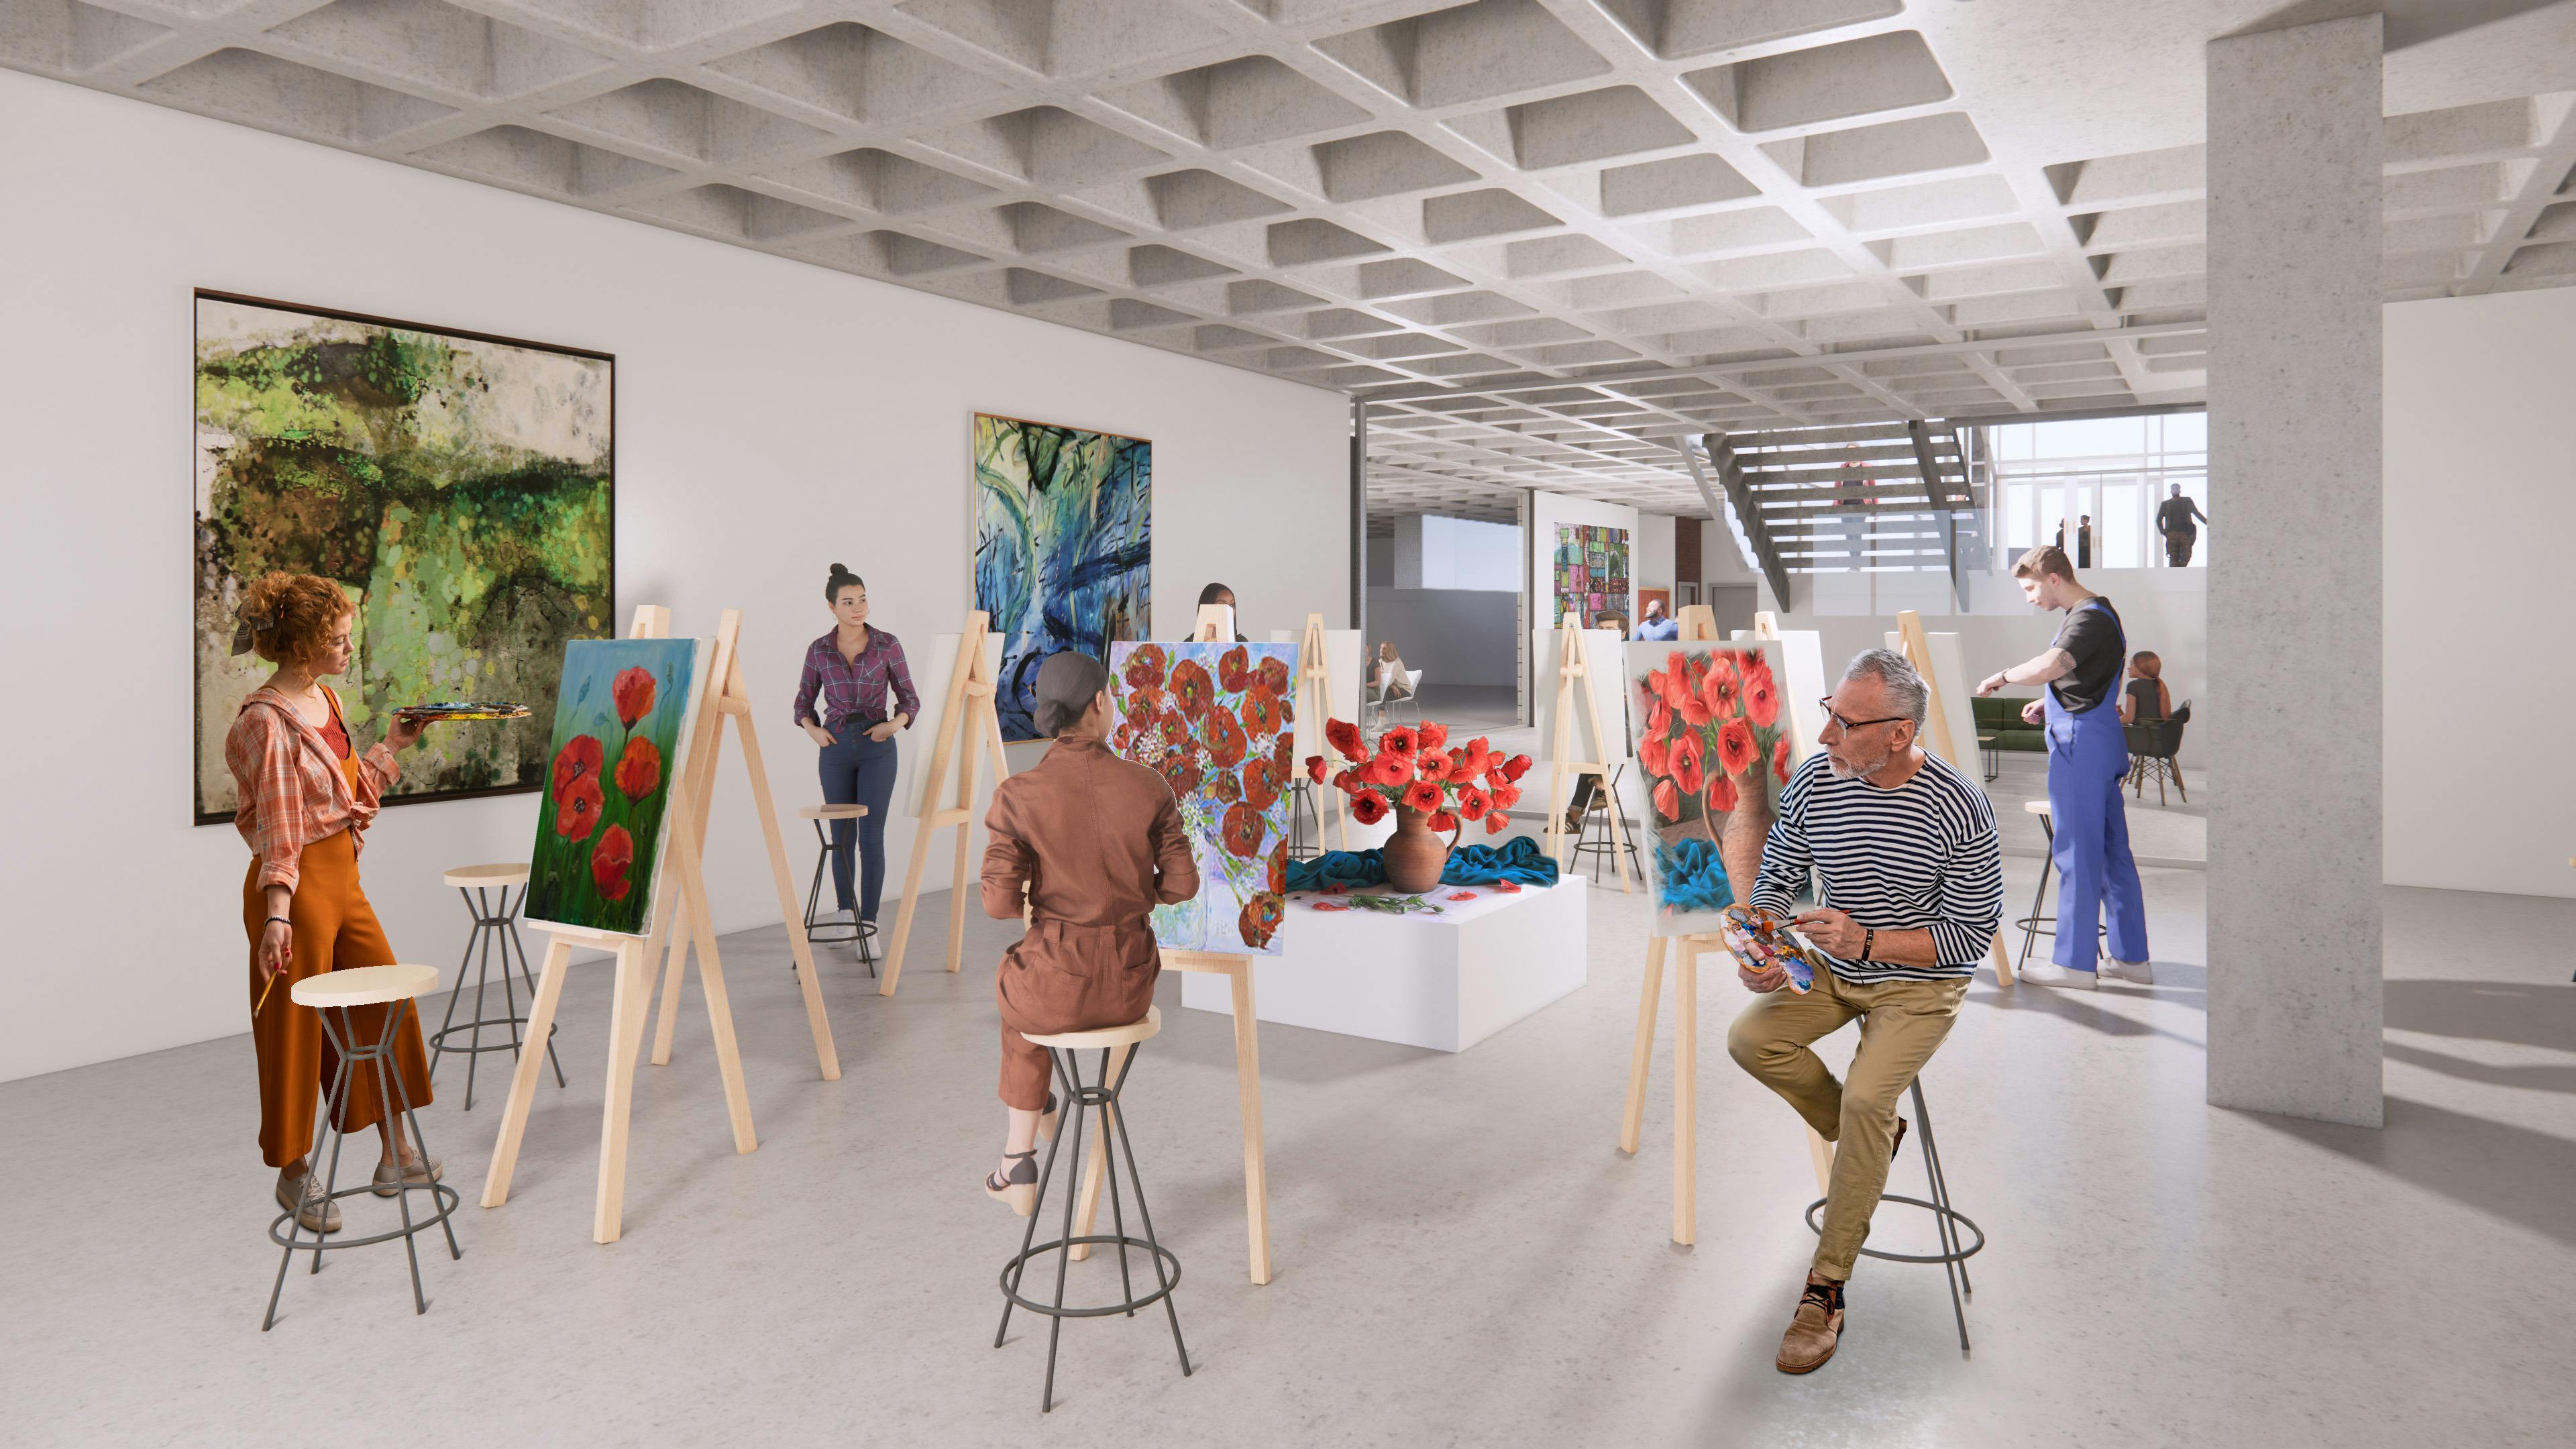 Architectural concept of Vancouver arts hub classroom space